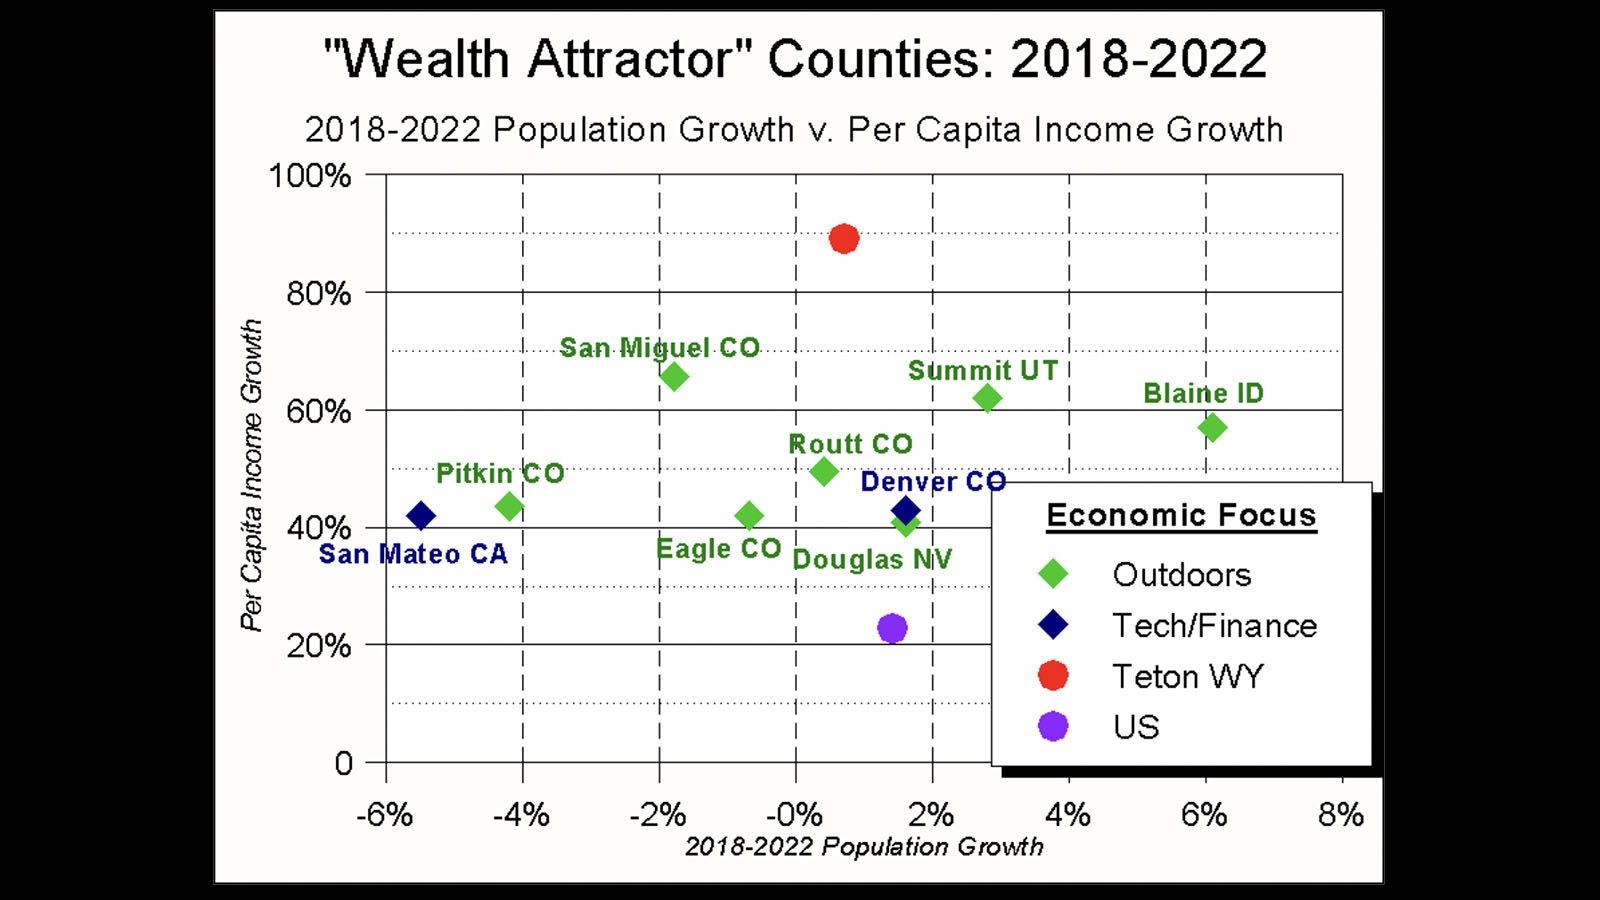 Counties in the U.S. West that were "wealth attractors" from 2018-2022, according to economist and Jackson Town Councilman Jonathan Schechter.